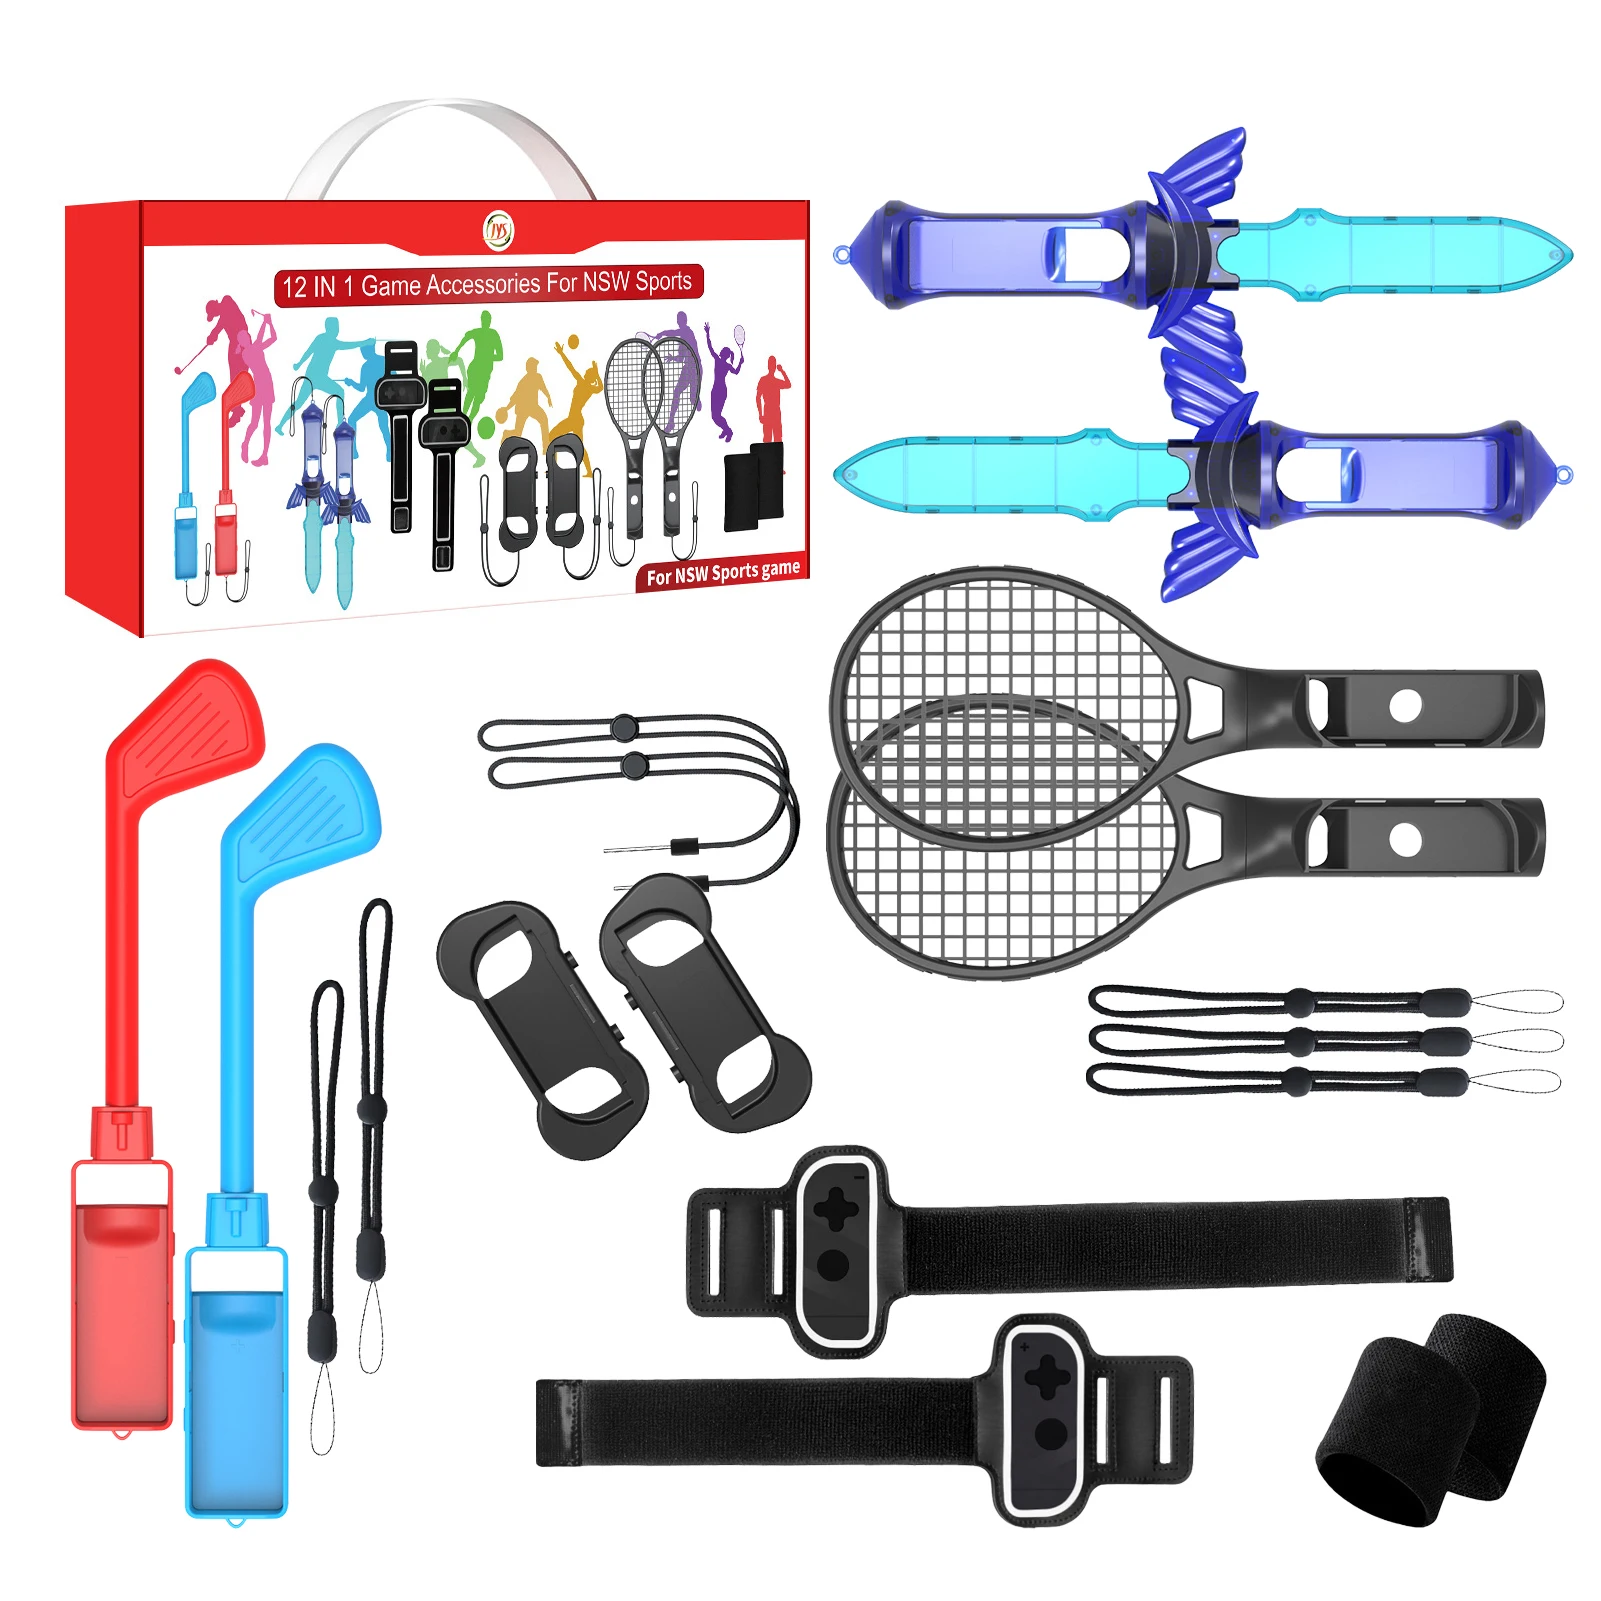 

For NS Switch Sports Control Set 12 In 1 Wristband Tennis Racket Fitness Leg Strap Sword Game Accessories For Switch OLED